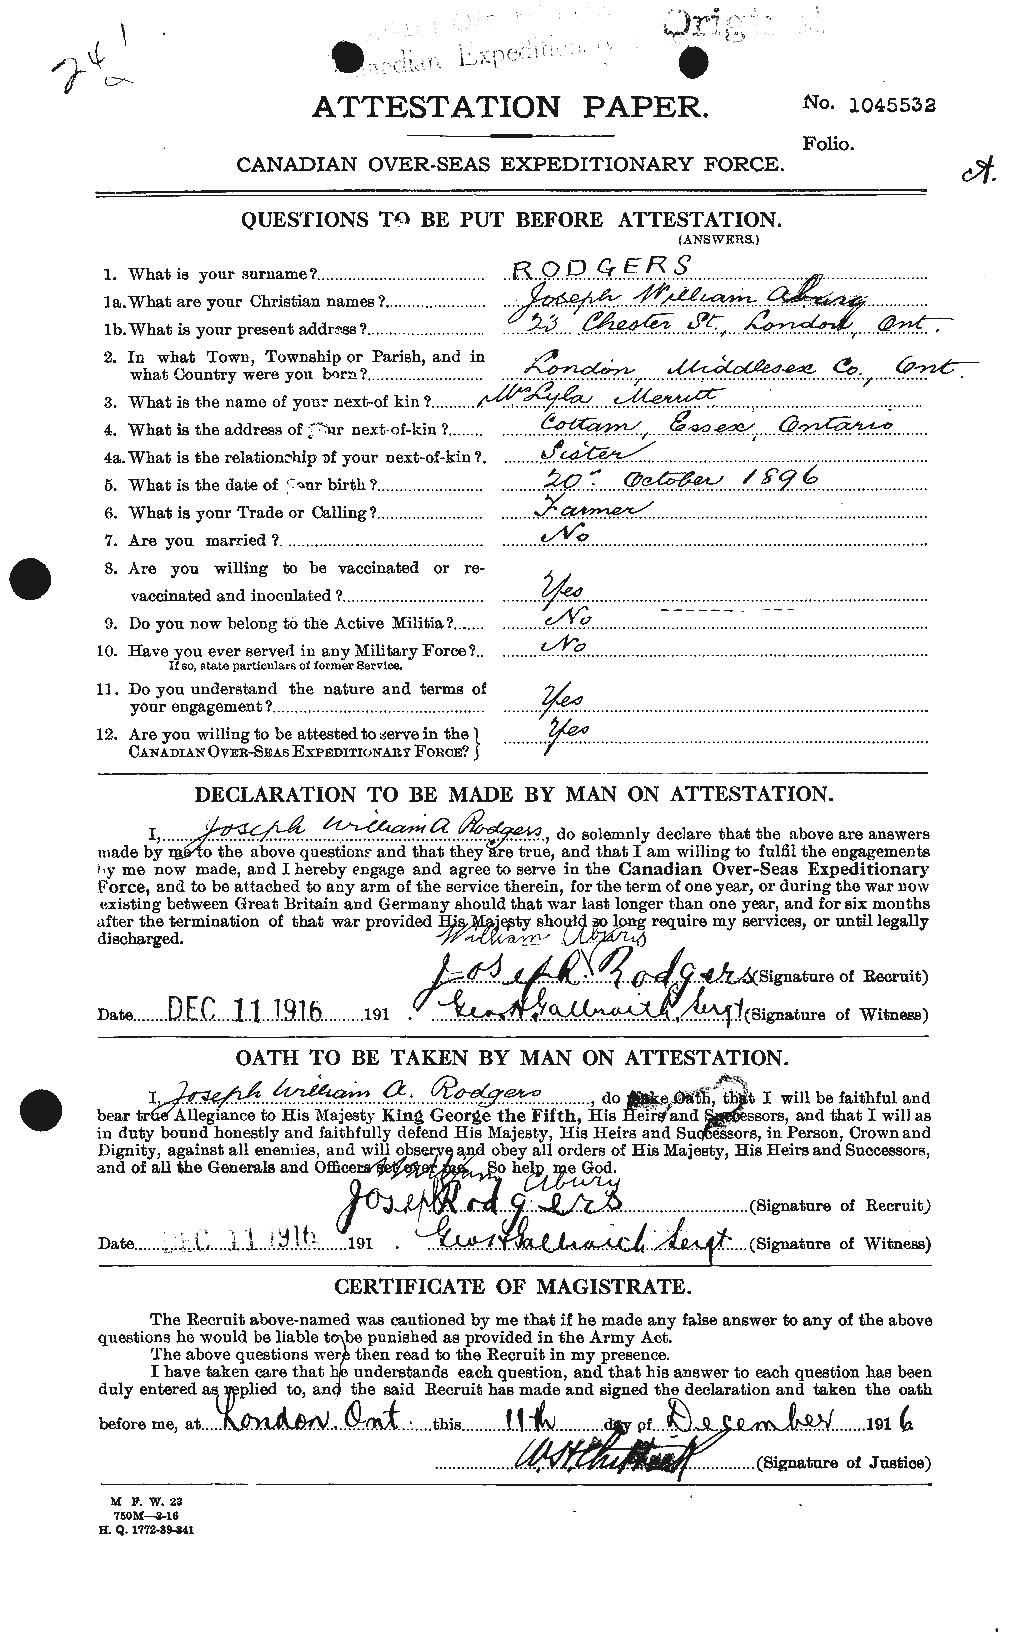 Personnel Records of the First World War - CEF 610438a